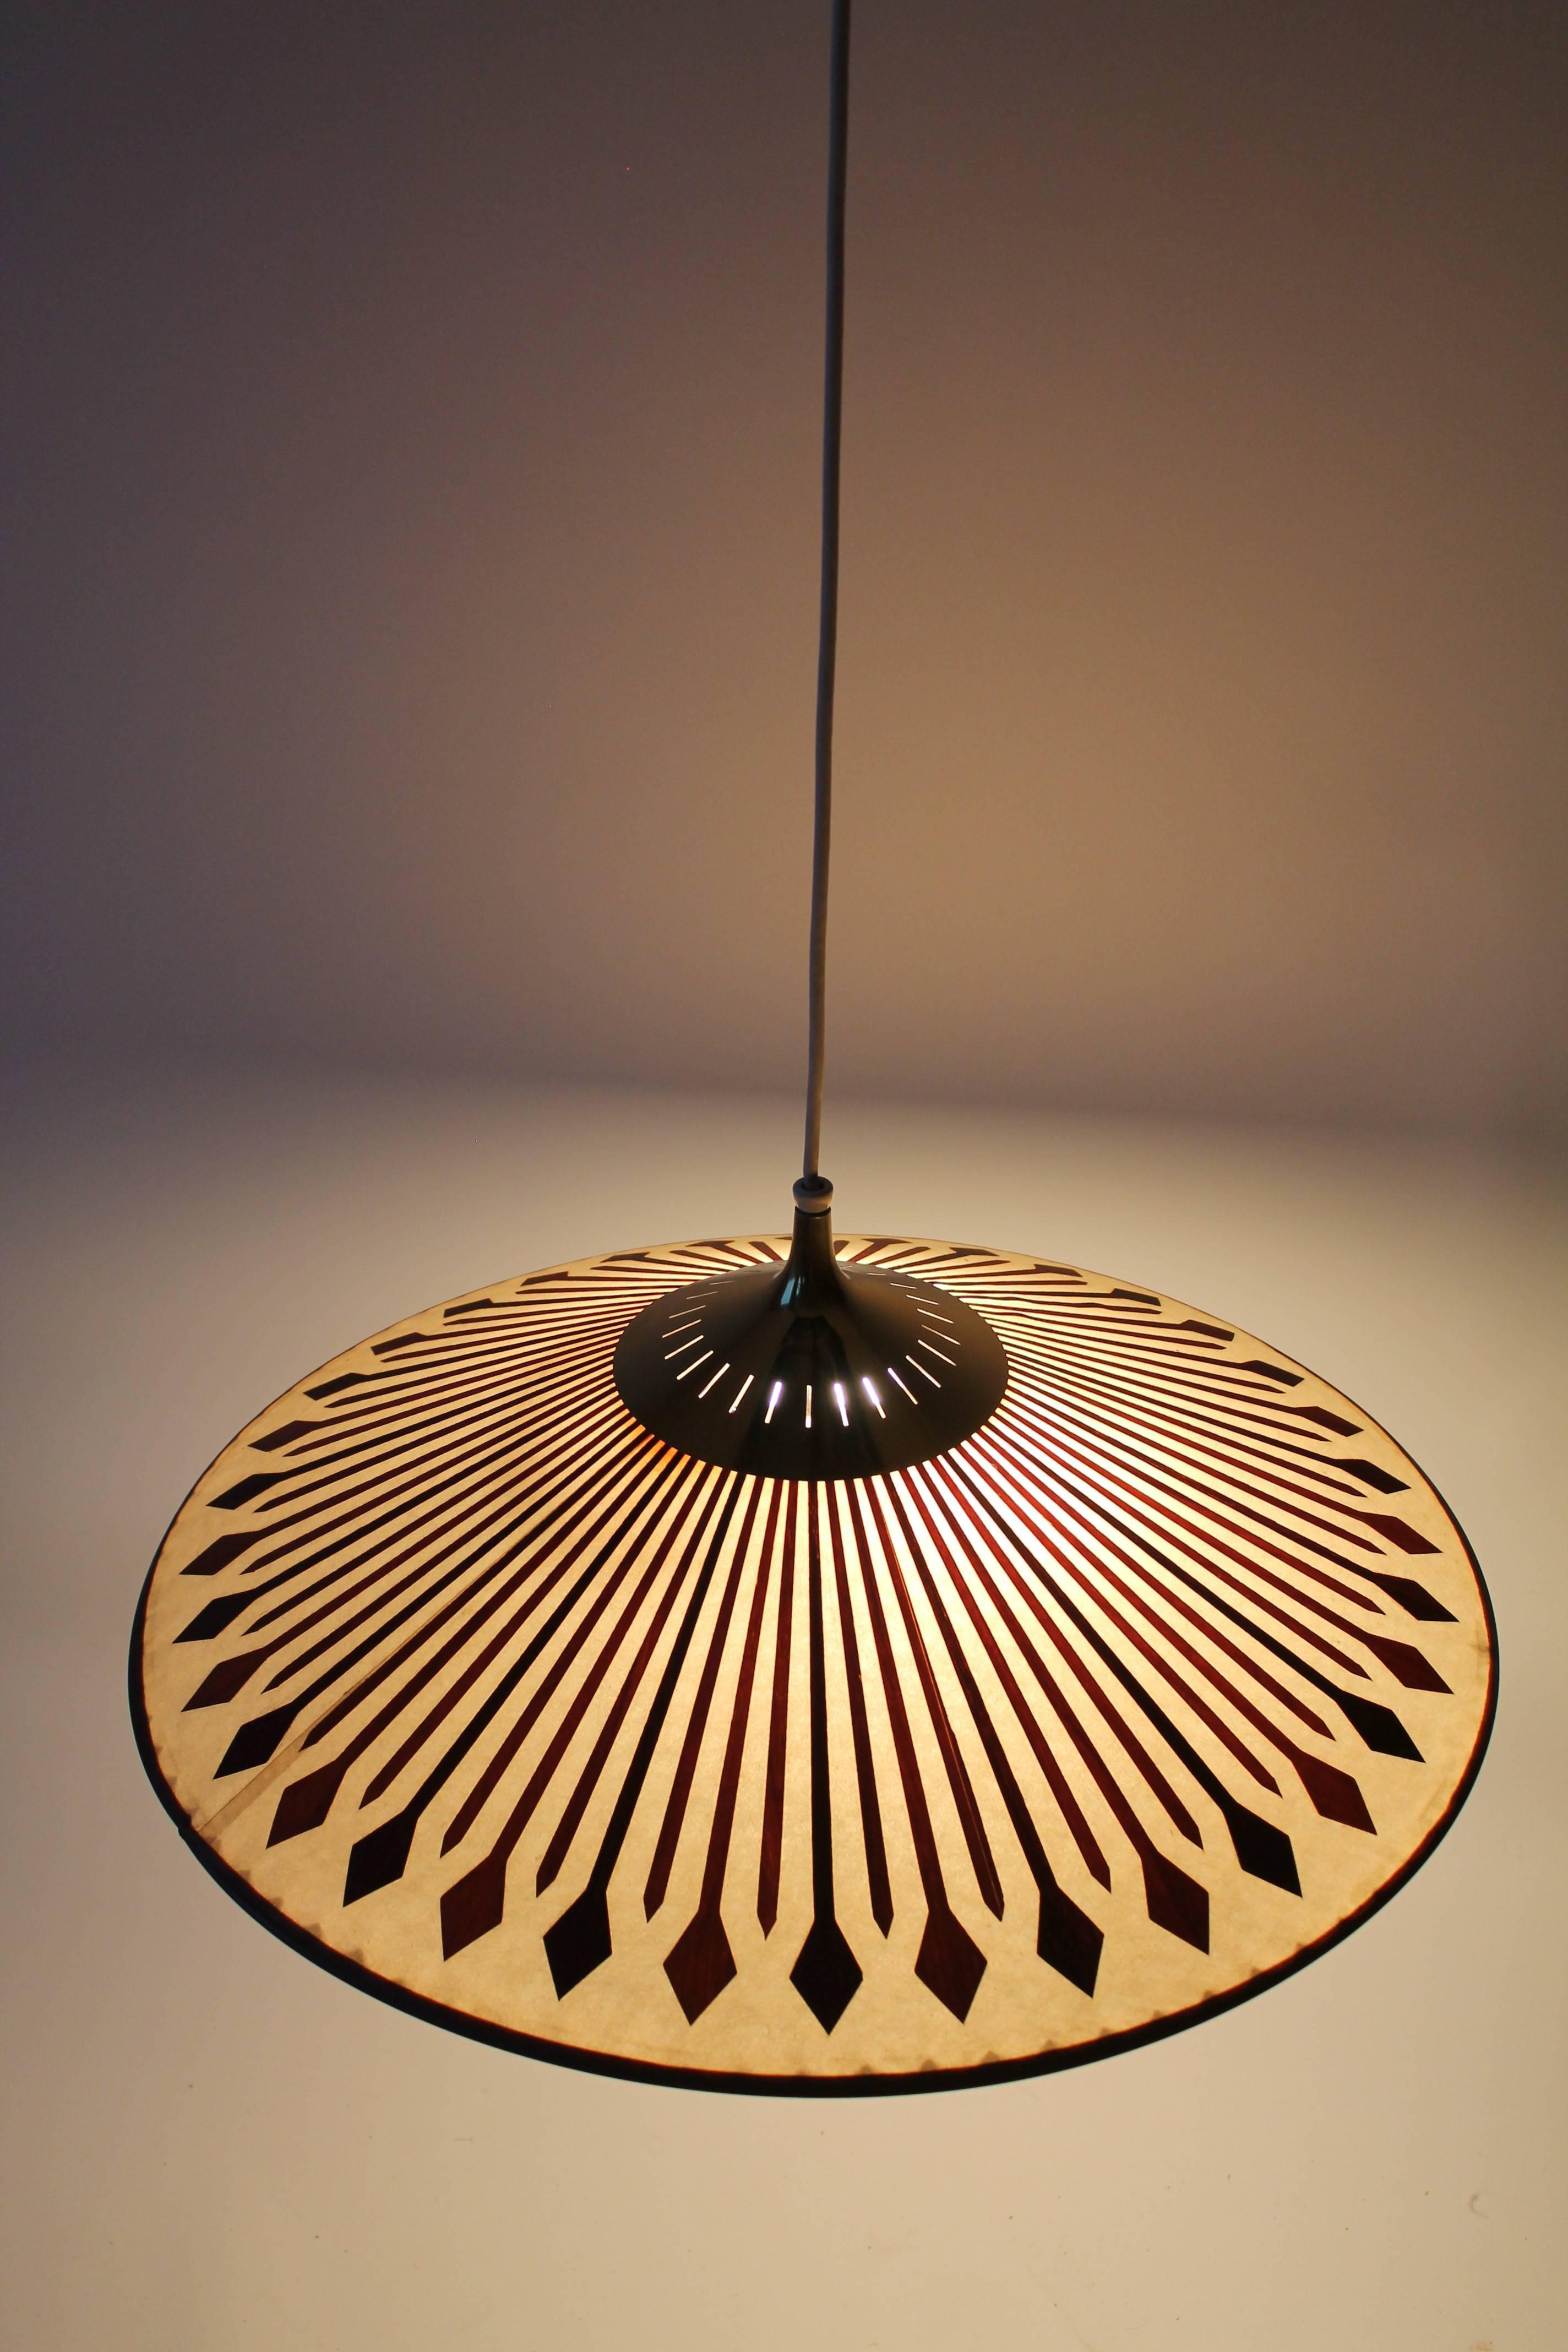 Classic Chinese hat style chandelier/pendant with die cutted thin slice of teak applied to the opale fiberglass surface revealing the color, grain and texture of this superb wood essence.

The glow emited by this lamp is very warm. 

Vented